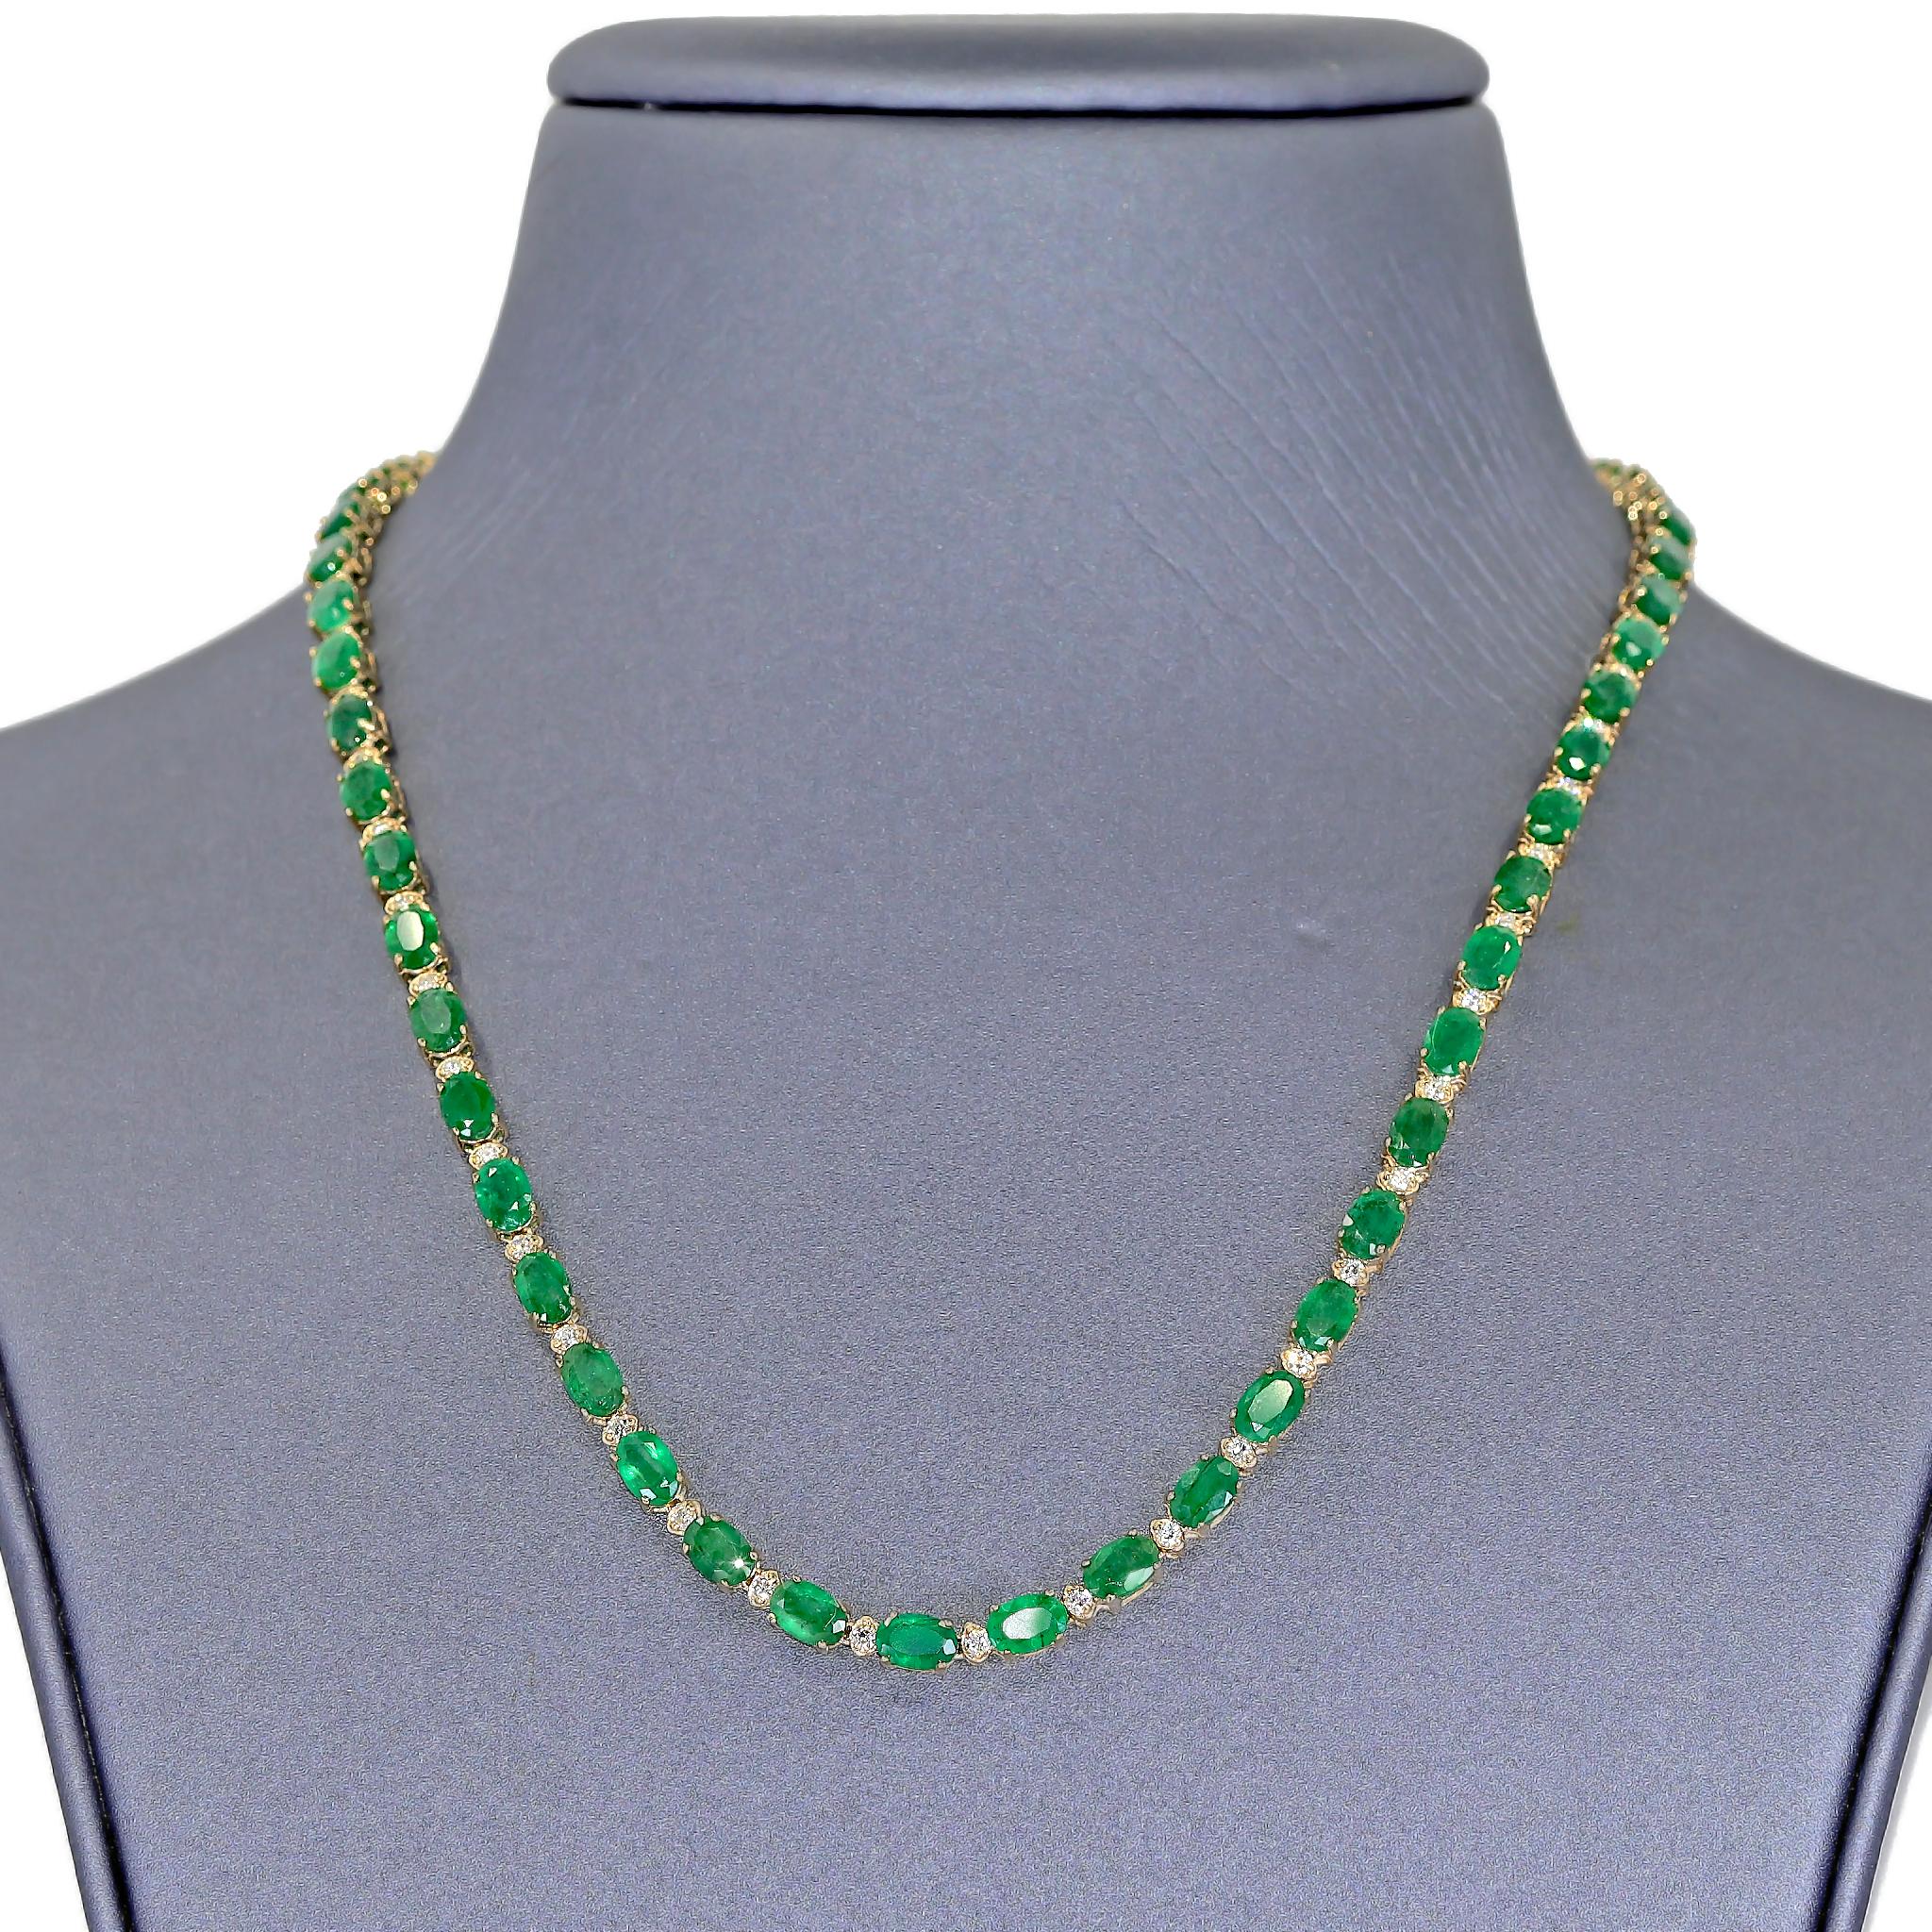 Magnificent Emerald and Diamond Necklace in 14k yellow gold featuring 46 matched, completely natural, faceted oval emeralds totaling 32.00 carats, individually prong-set and flanked with 46 shimmering round brilliant-cut white (H-I/SI1) diamonds